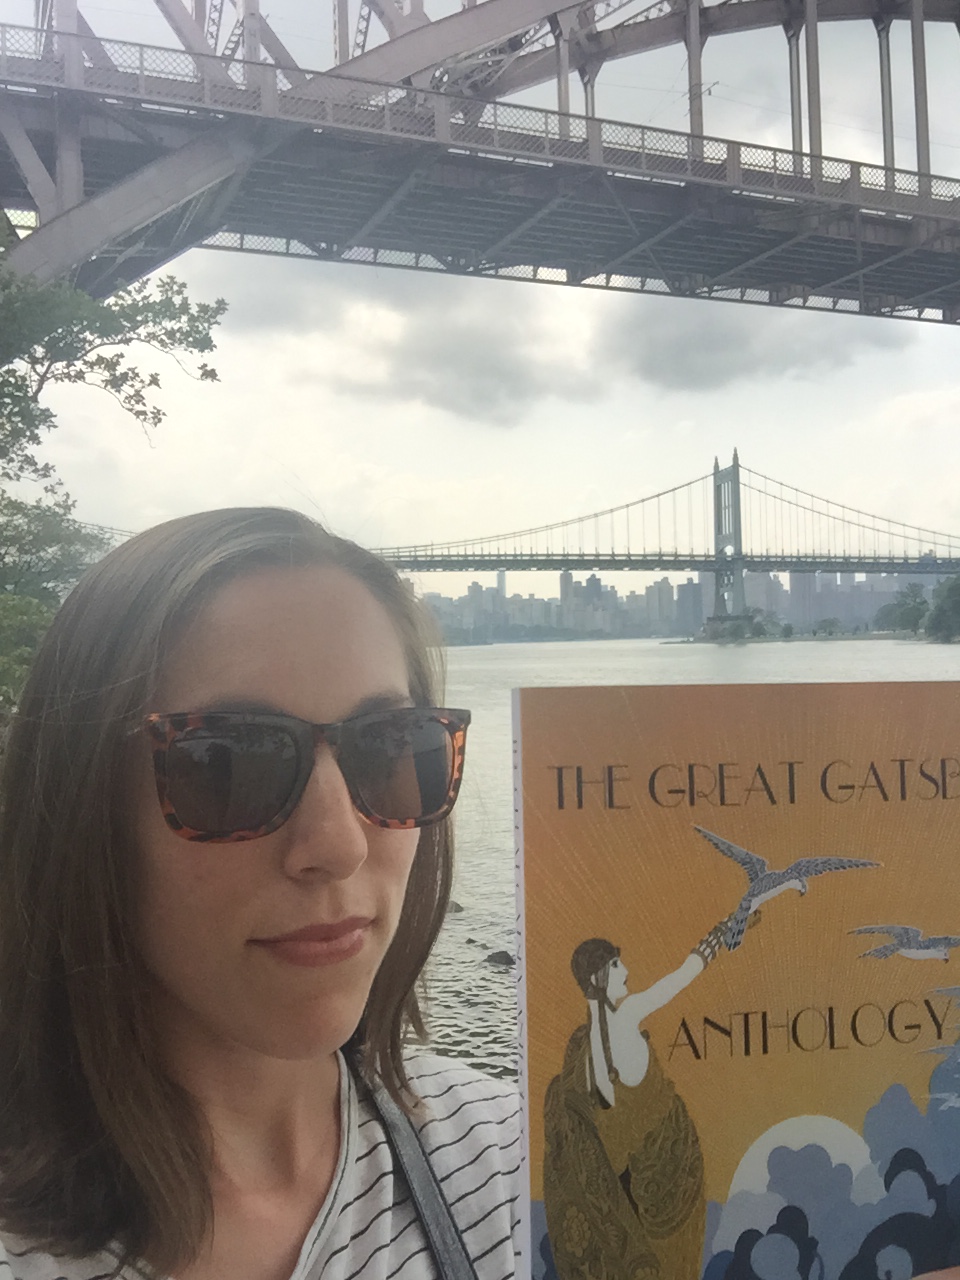 PHOTO: Poet <b>Rachel Voss</b> with her copy of The Great Gatsby Anthology in ... - voss